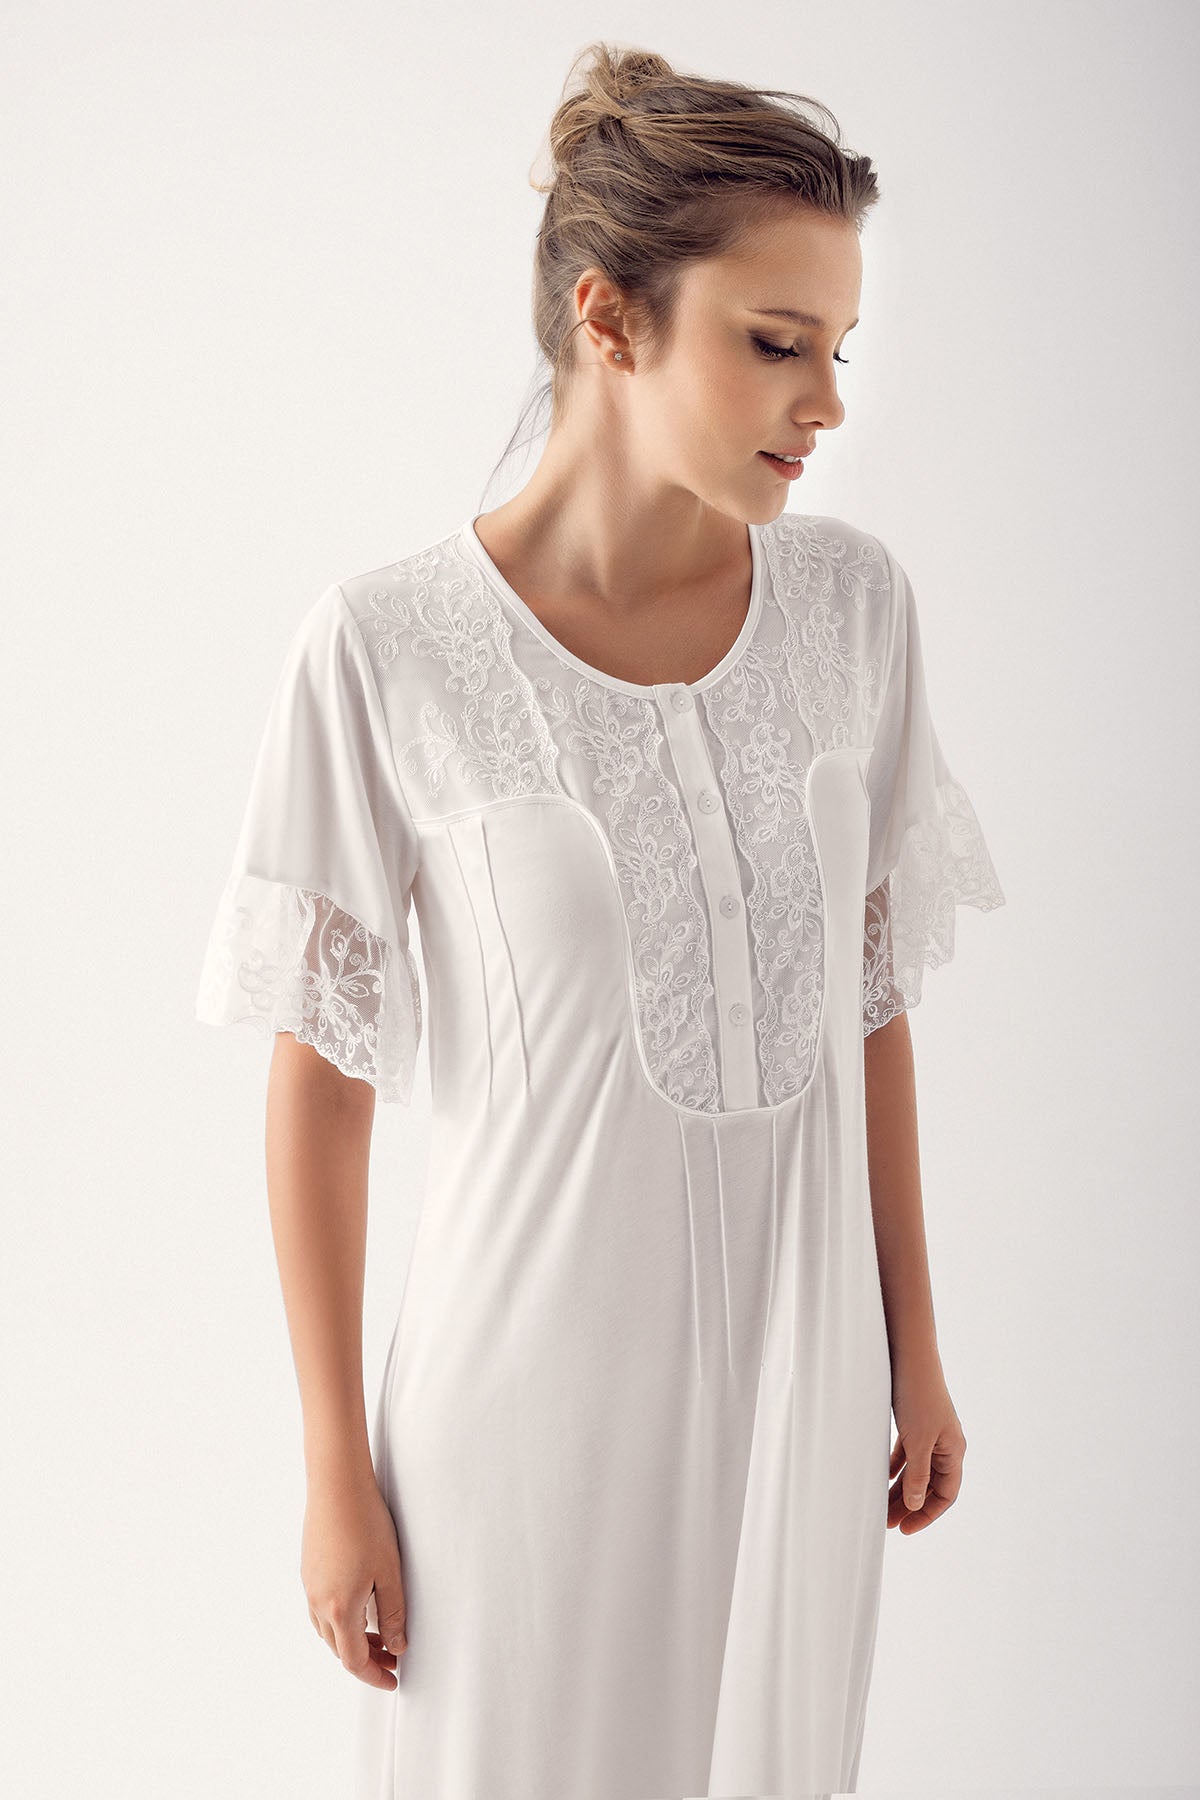 Shopymommy 14105 Collar And Sleeve Lace Maternity & Nursing Nightgown Ecru